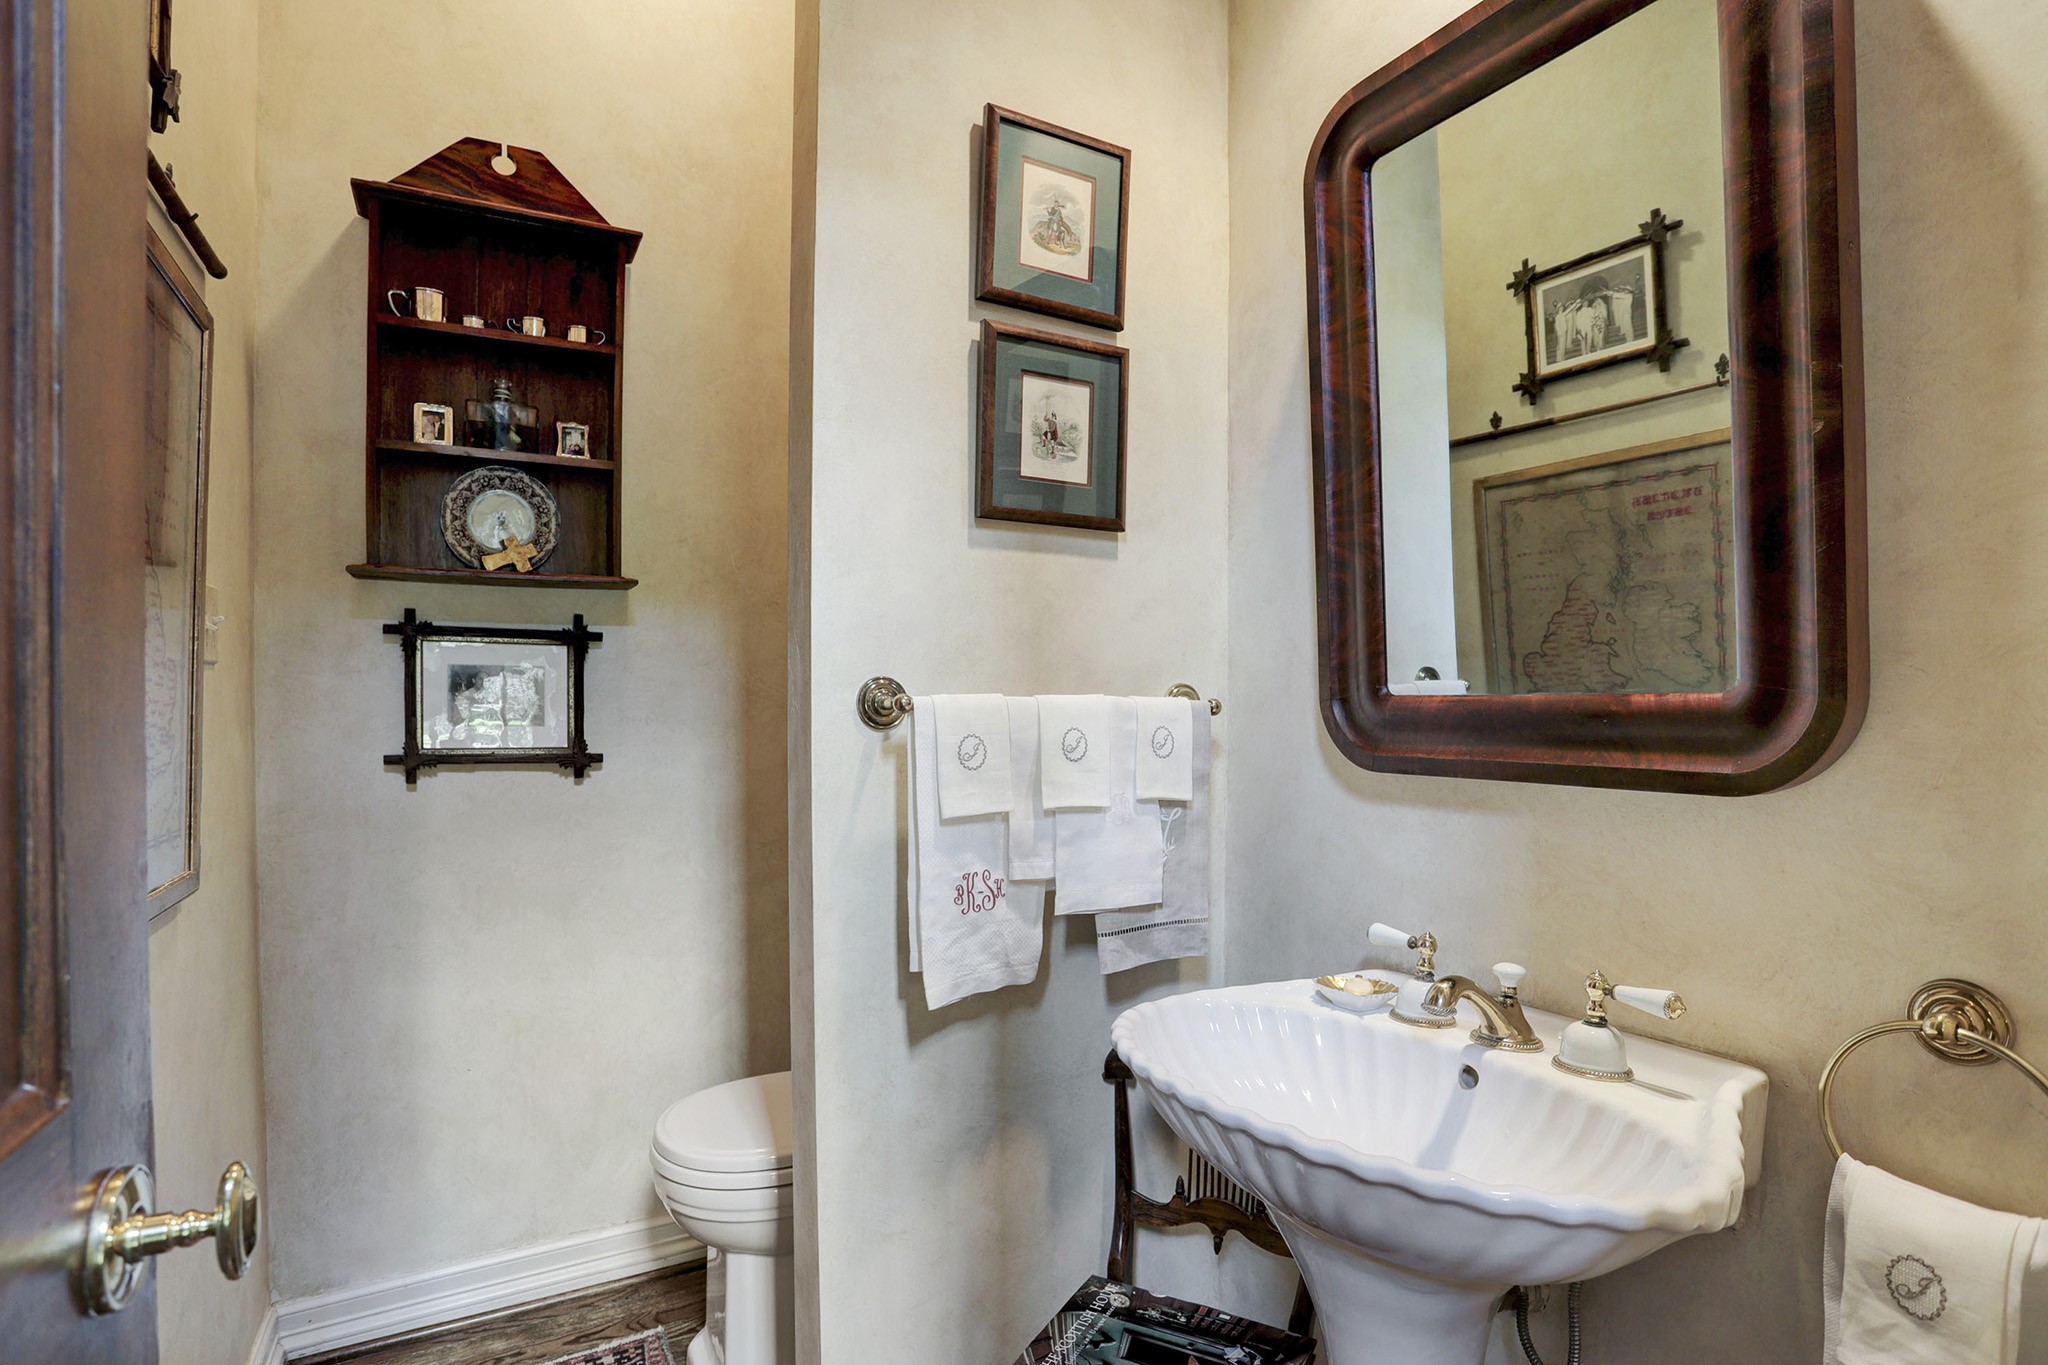 The powder bath is located across from the stairs and reception hall area.